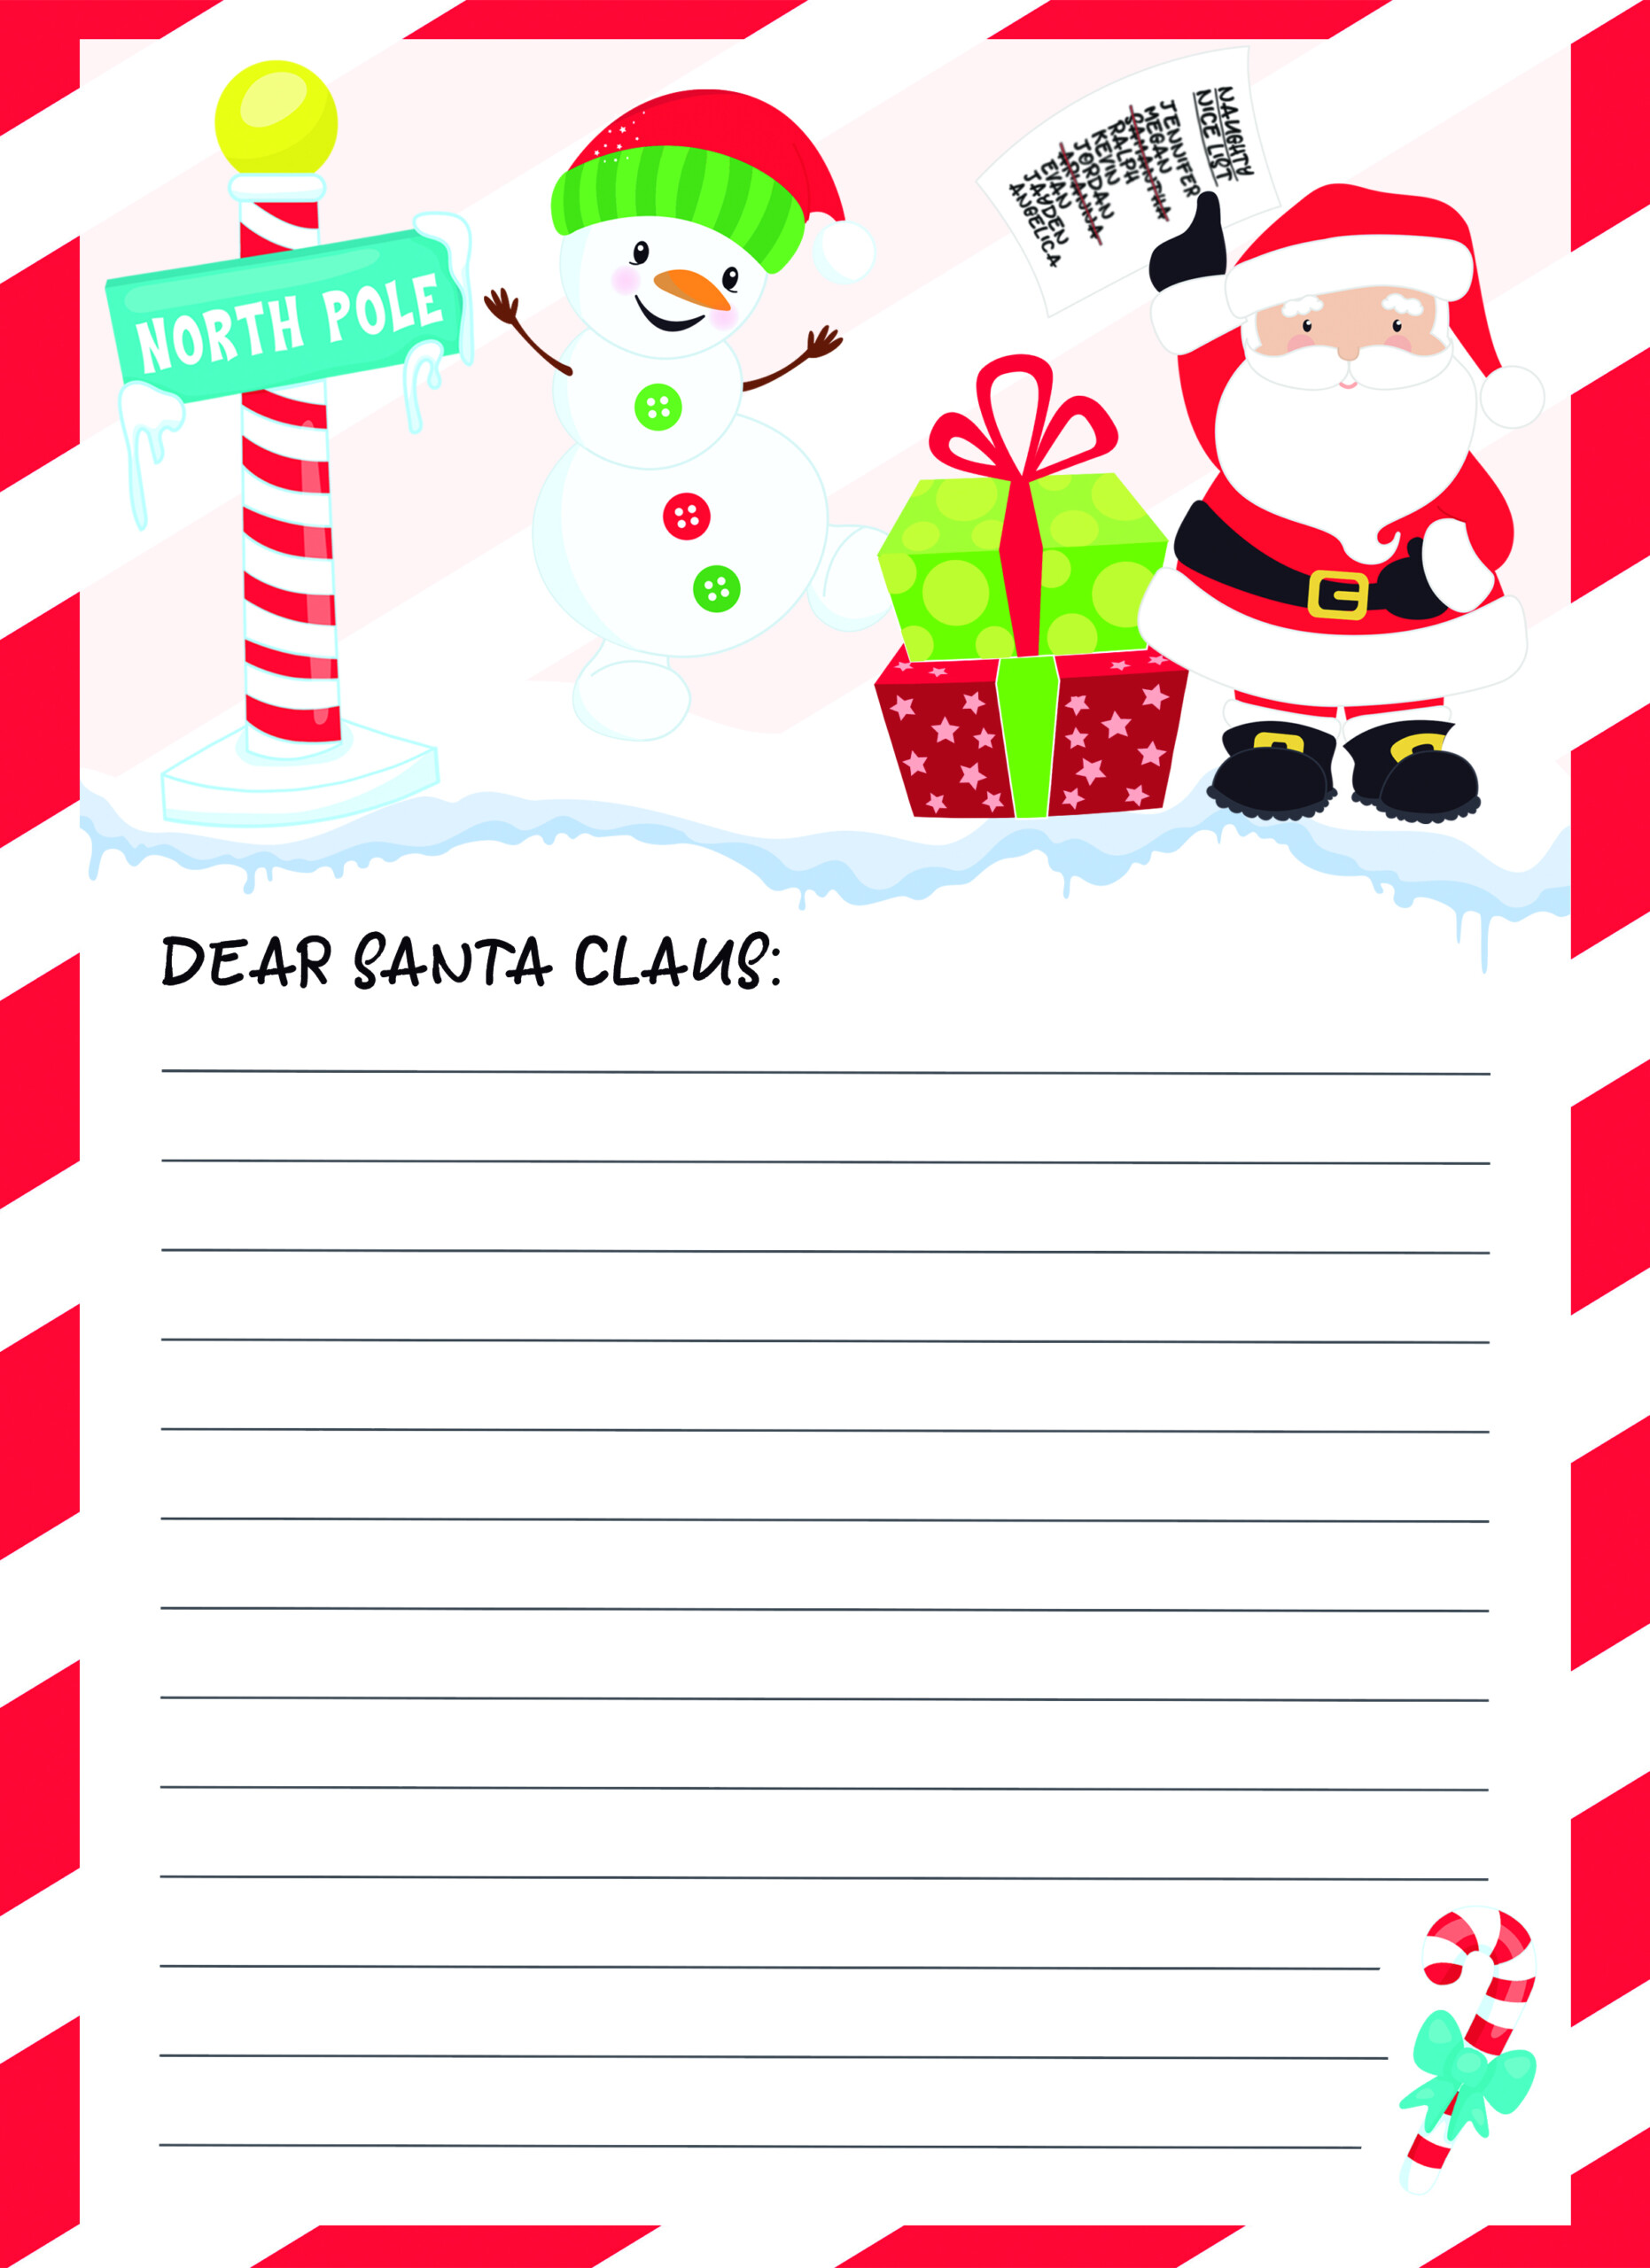 Start A Holiday Tradition With This Letter To Santa